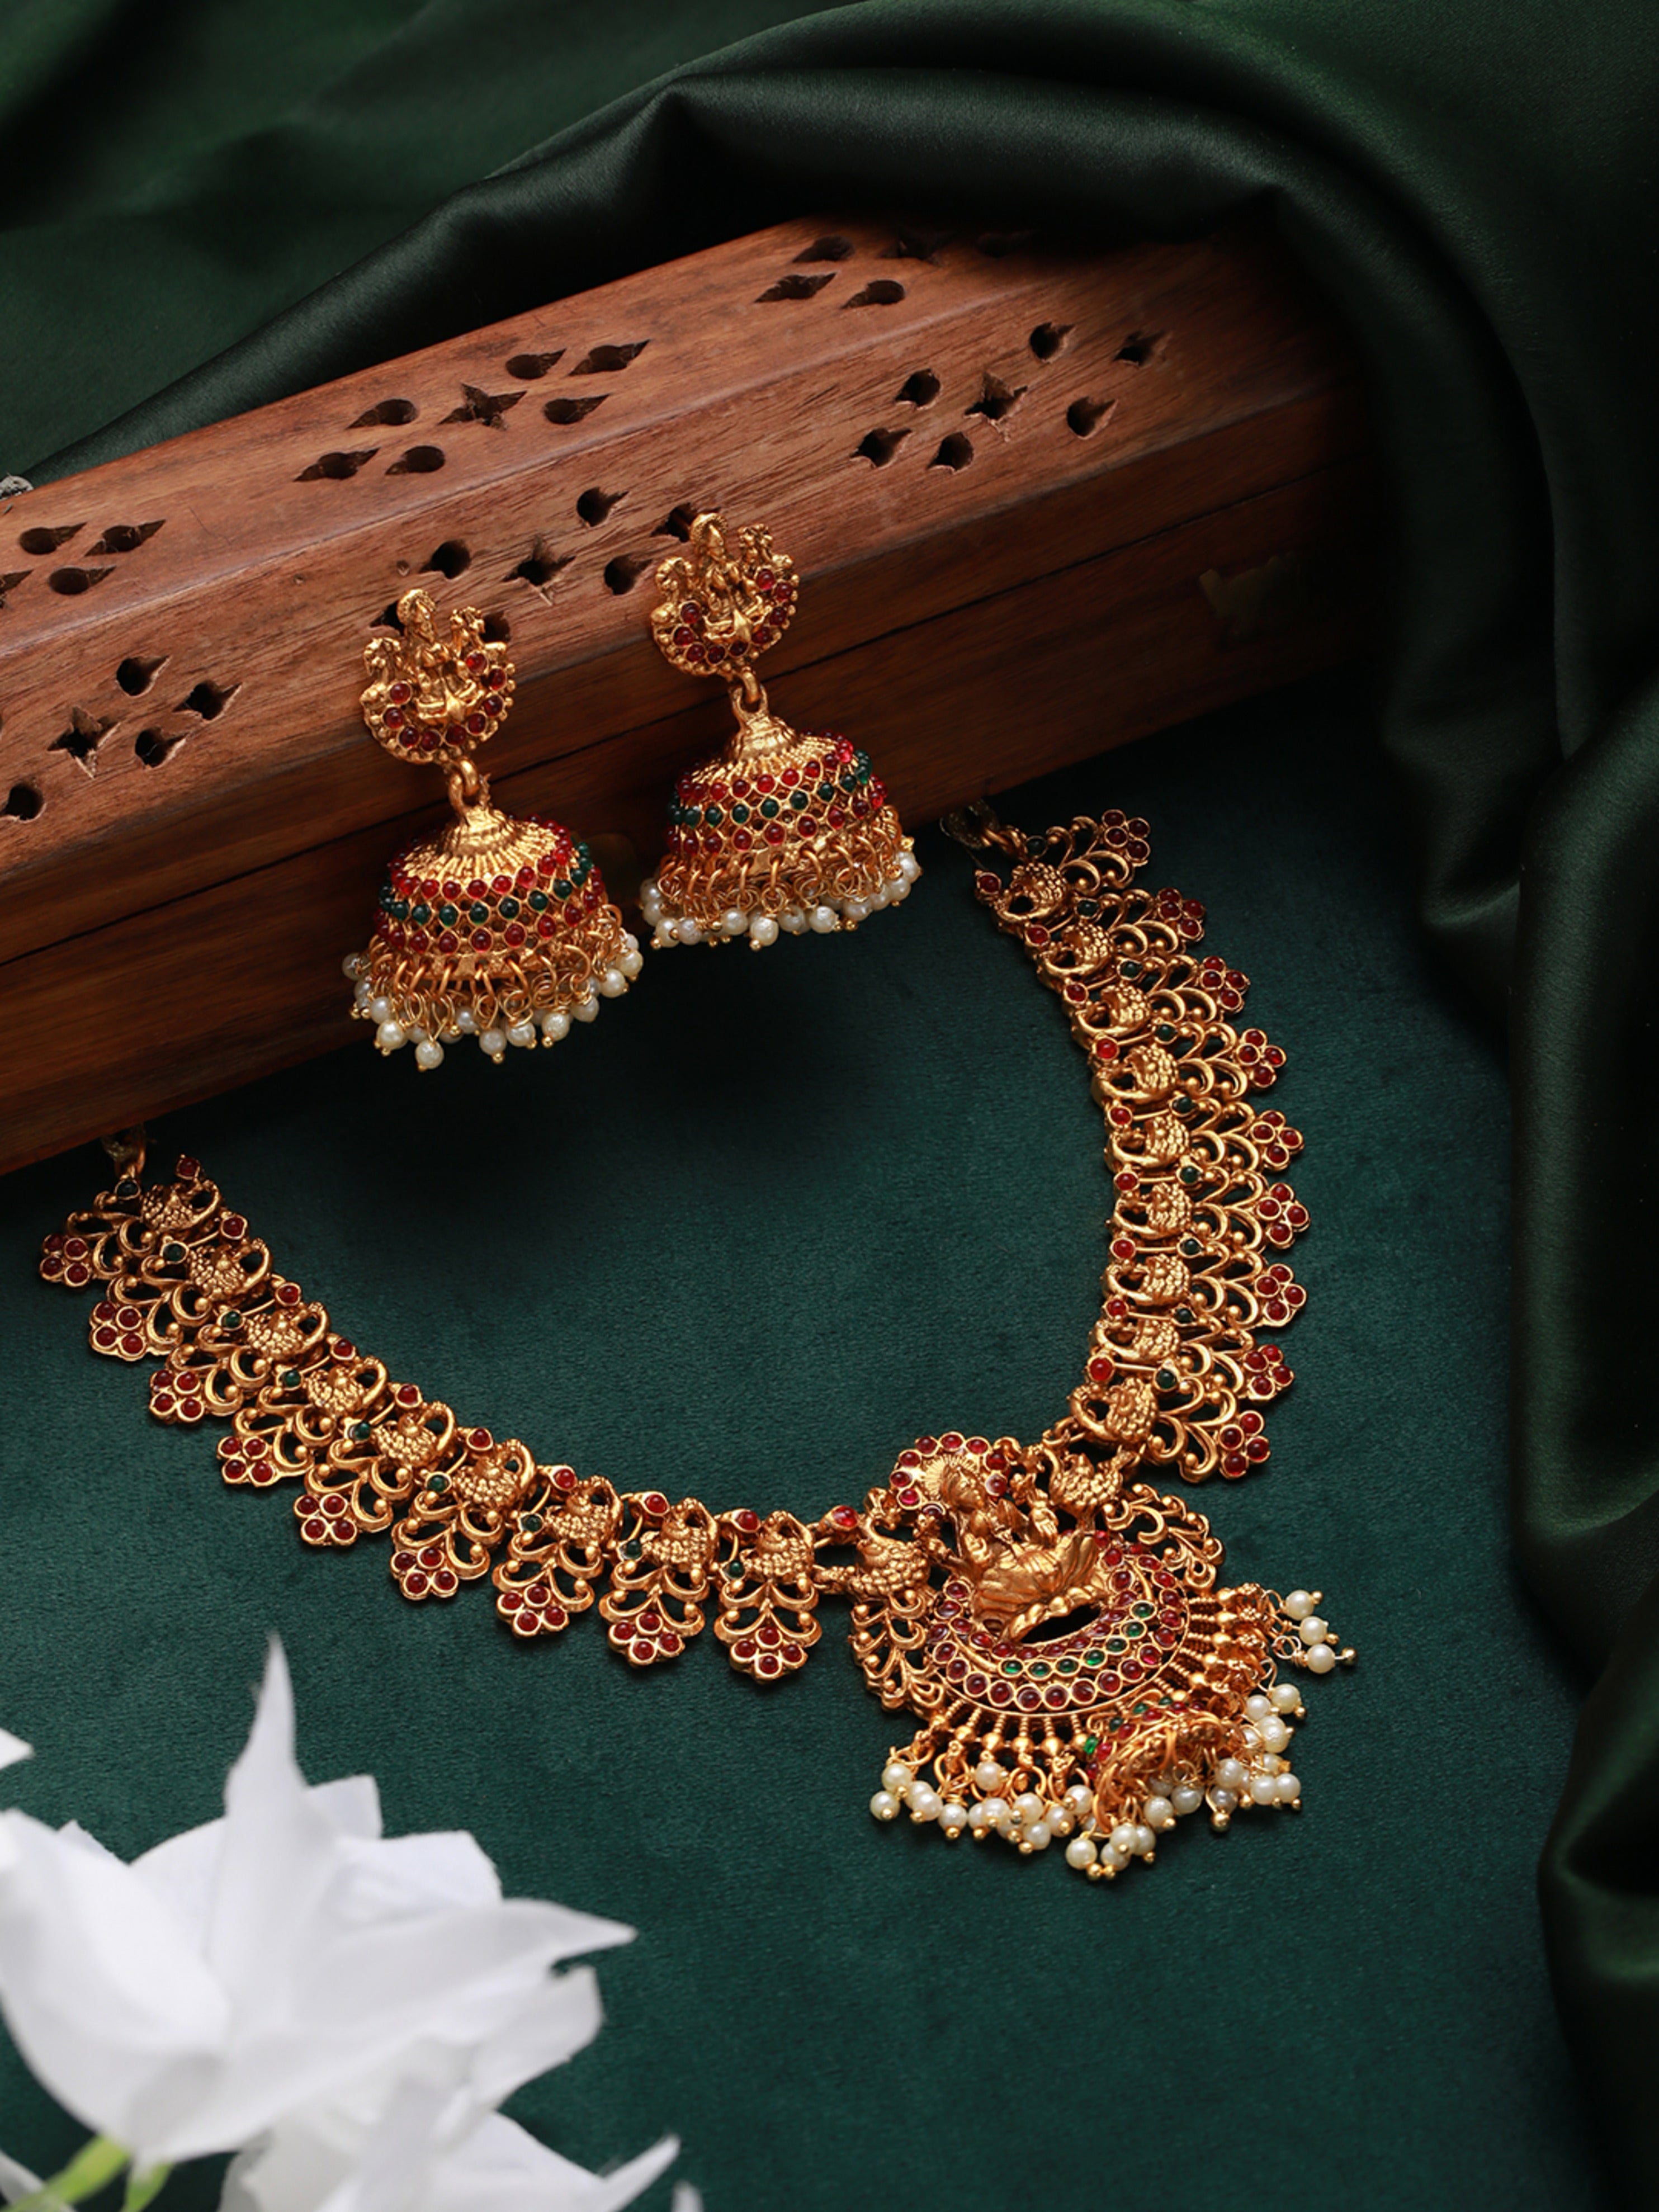 Gold-Plated Red & Green Stone-Studded & Pearl Beaded Lakshmi Temple Jewellery Set